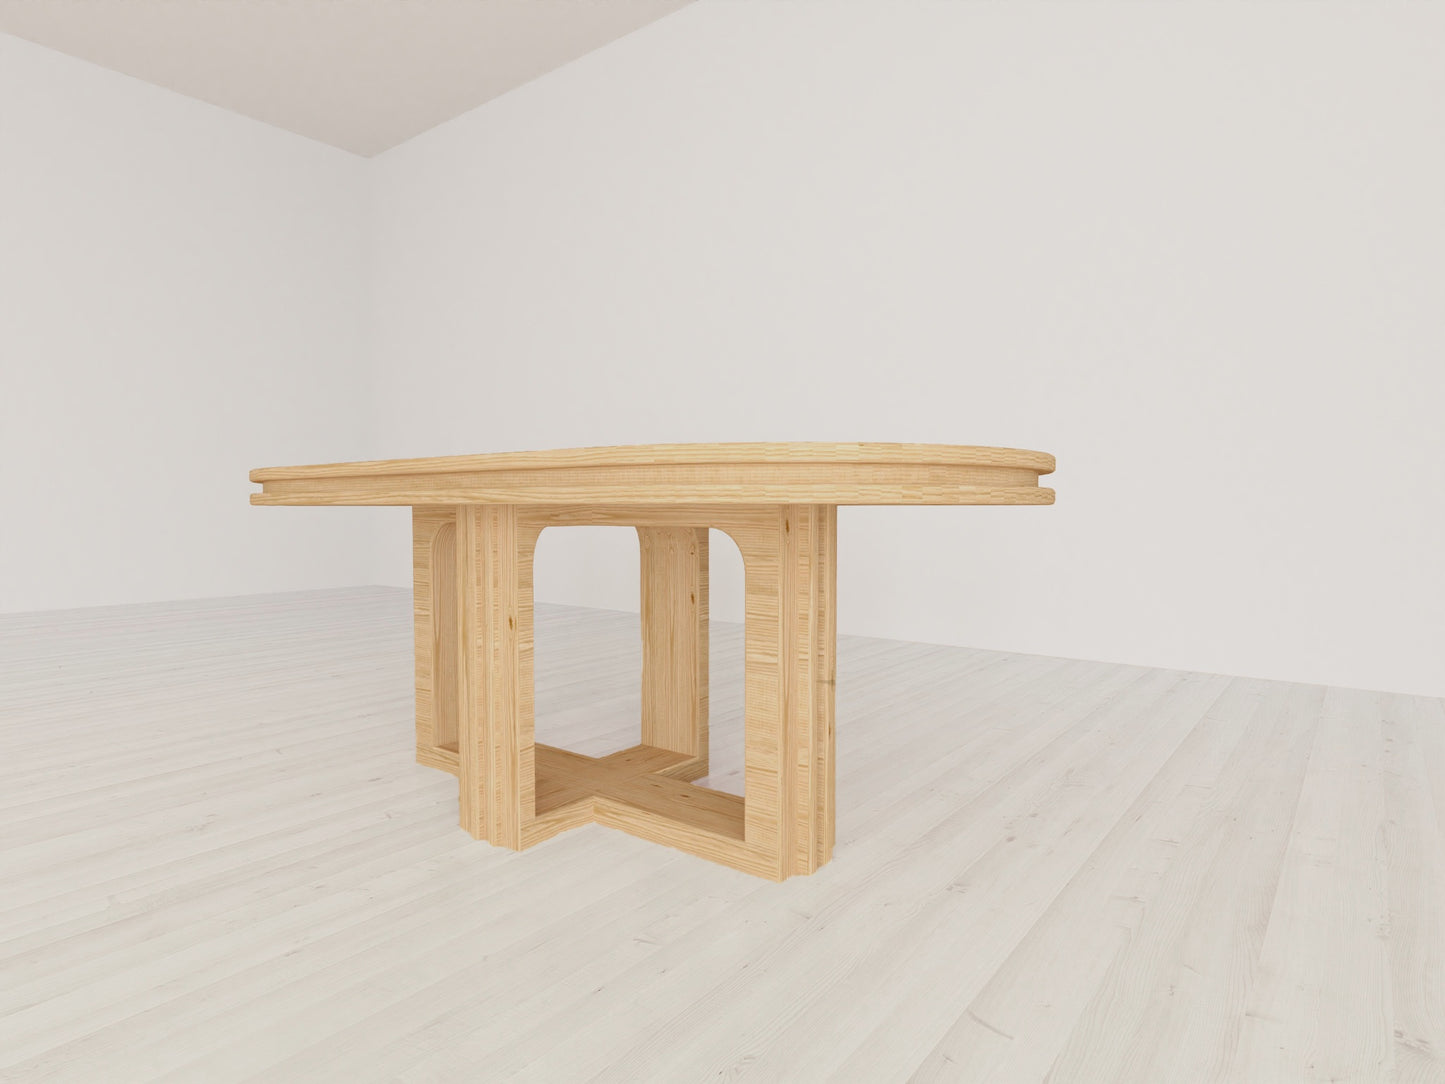 INTRODUCING The Andrya Table